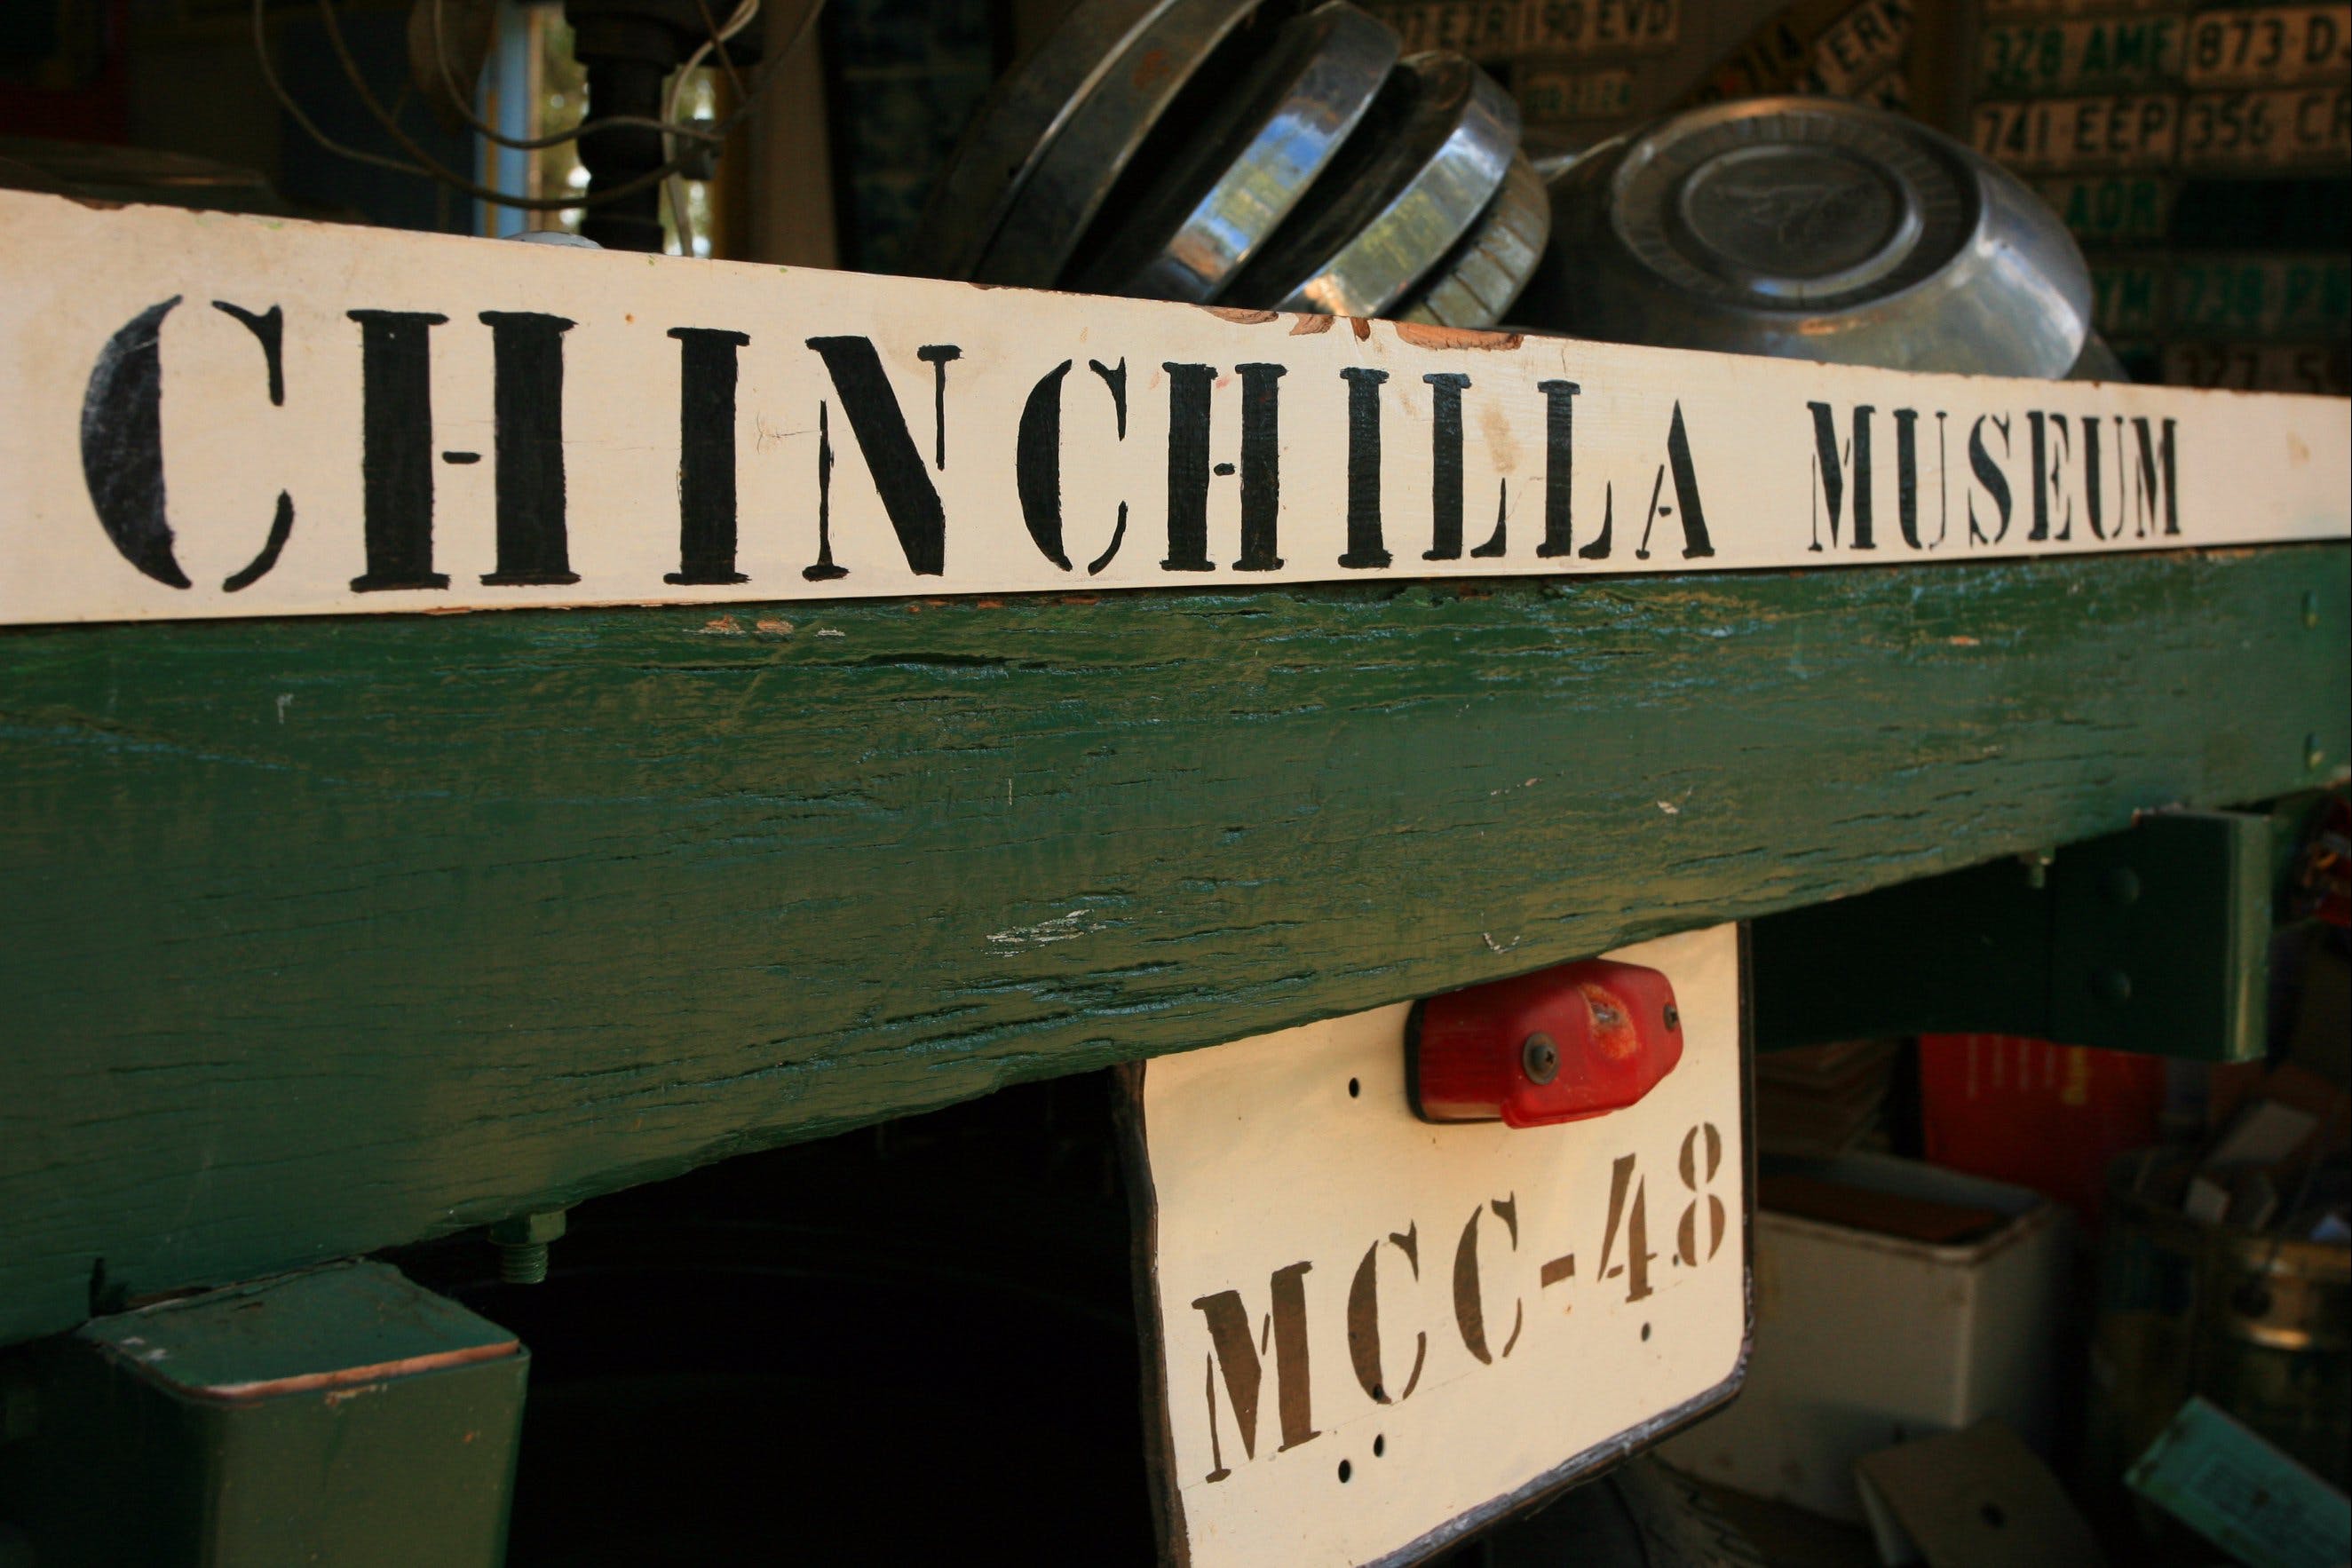 Chinchilla Historical Museum - Attractions